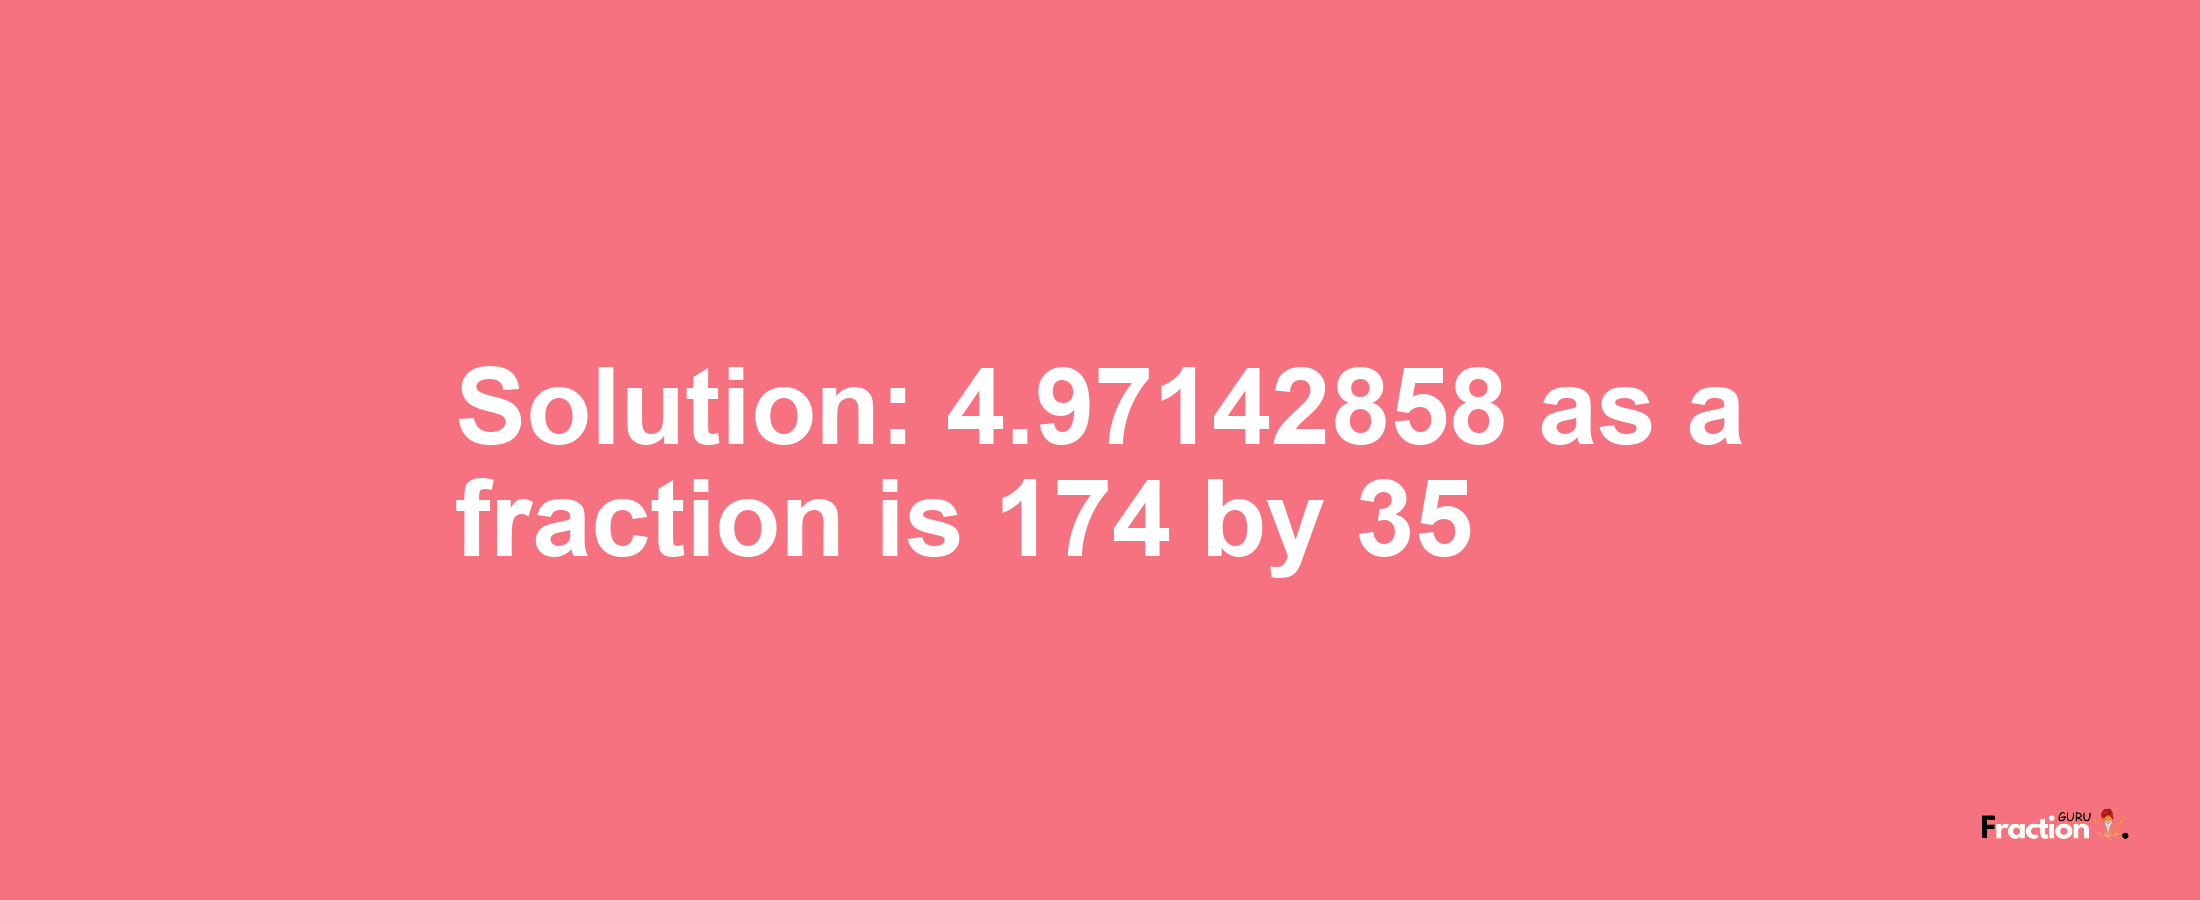 Solution:4.97142858 as a fraction is 174/35